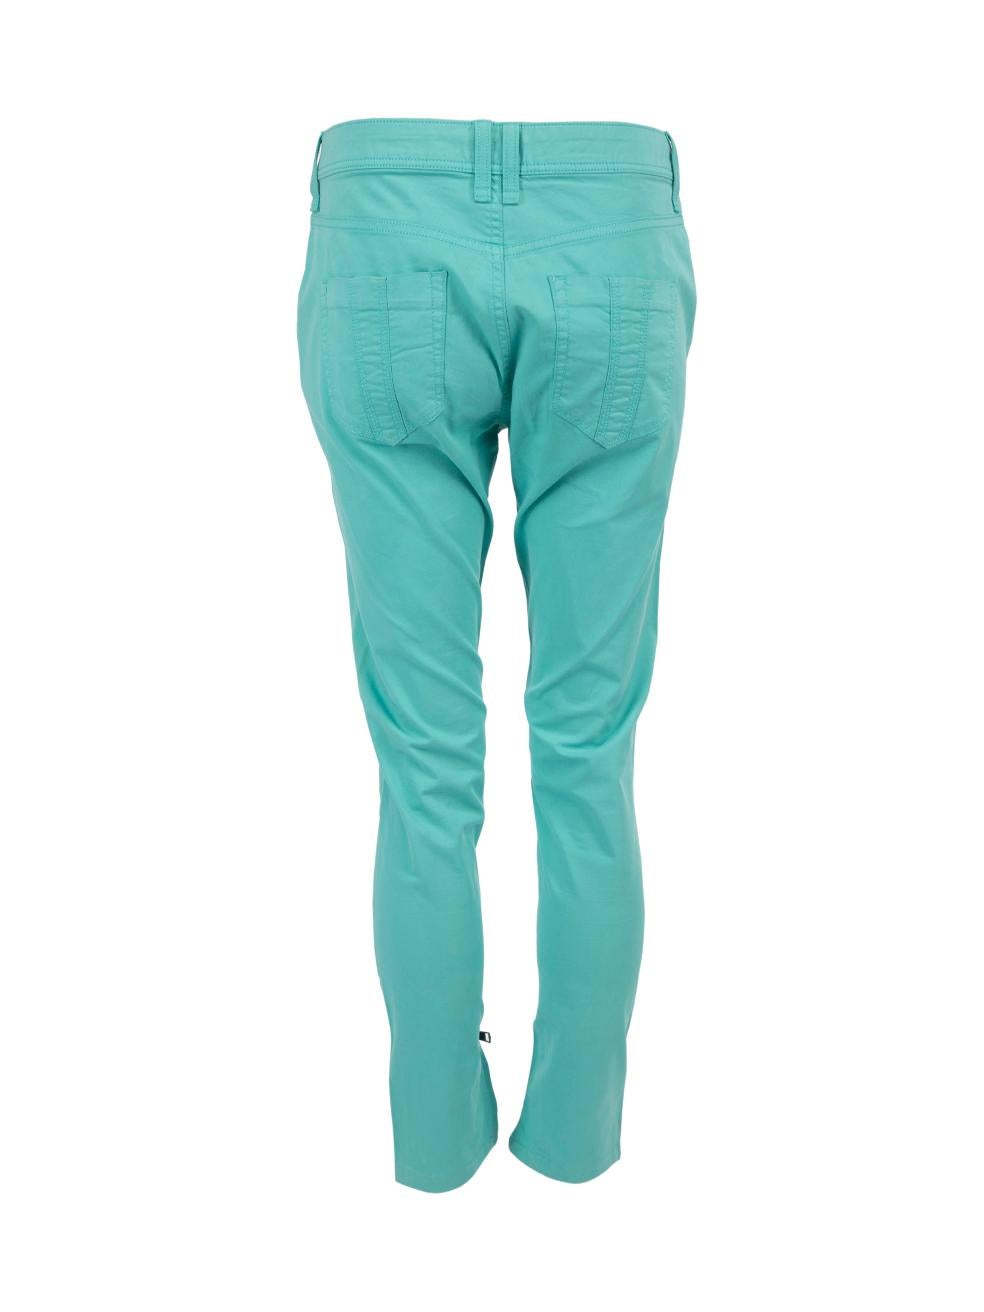 Burberry Brit Turquoise Bayswater Skinny Ankle Zip Trousers Size M In Good Condition In London, GB